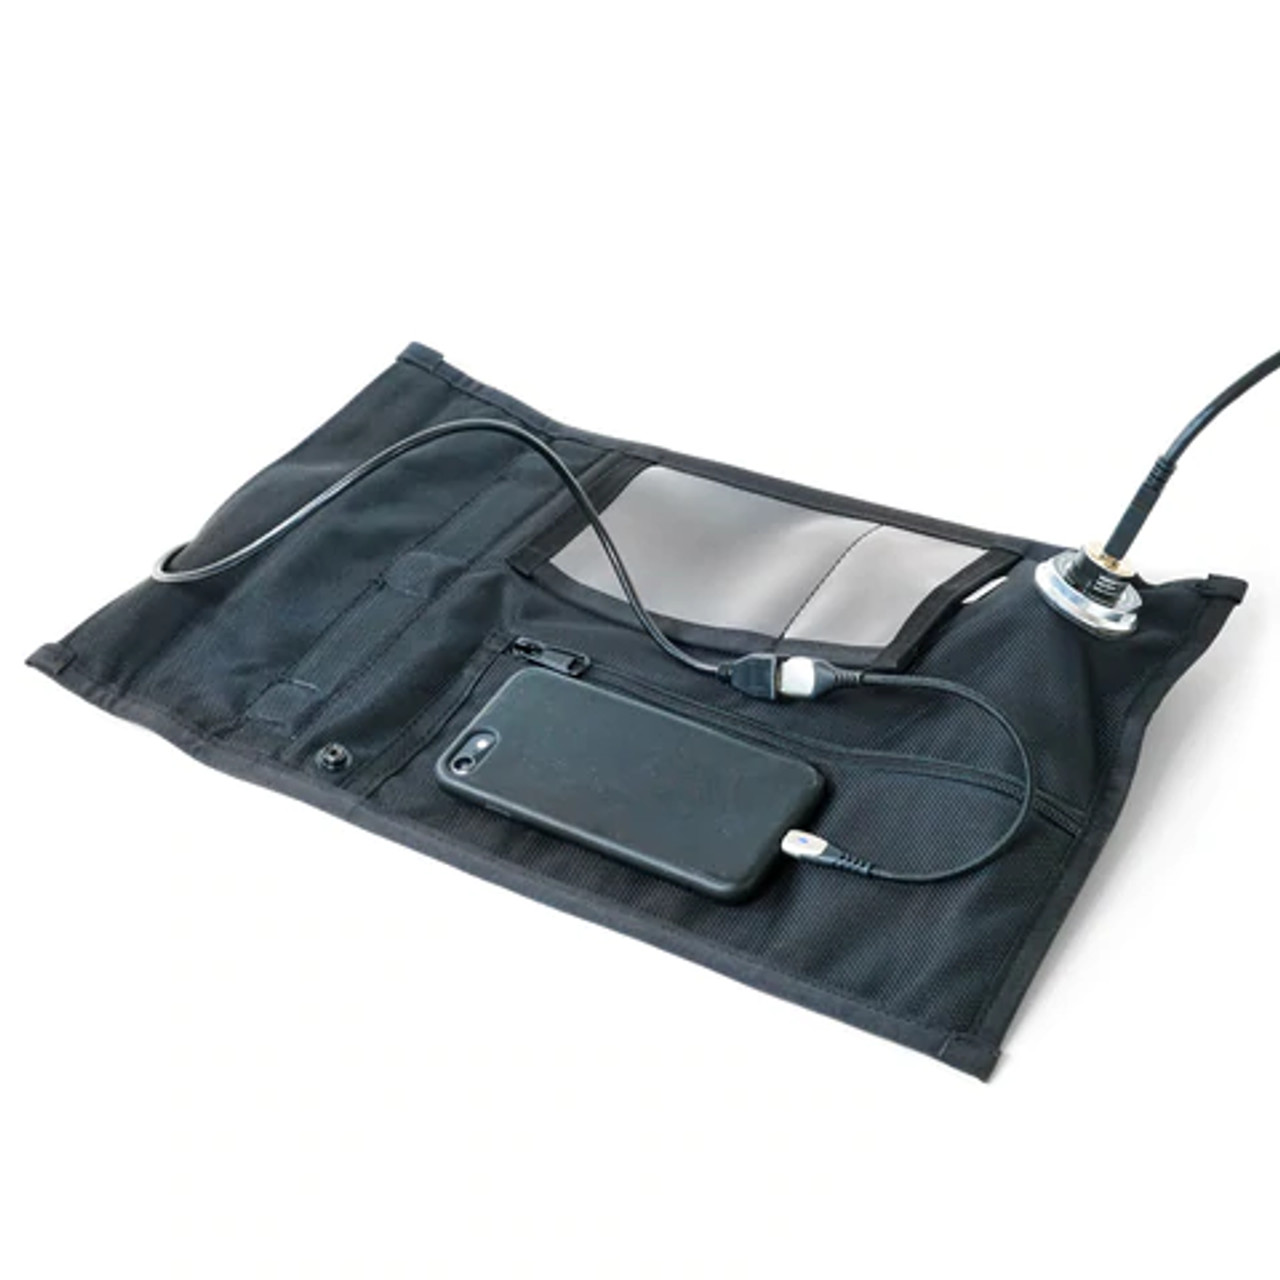 Mission Darkness Faraday Bag for Keyfobs // Device Shielding for Smart Always on